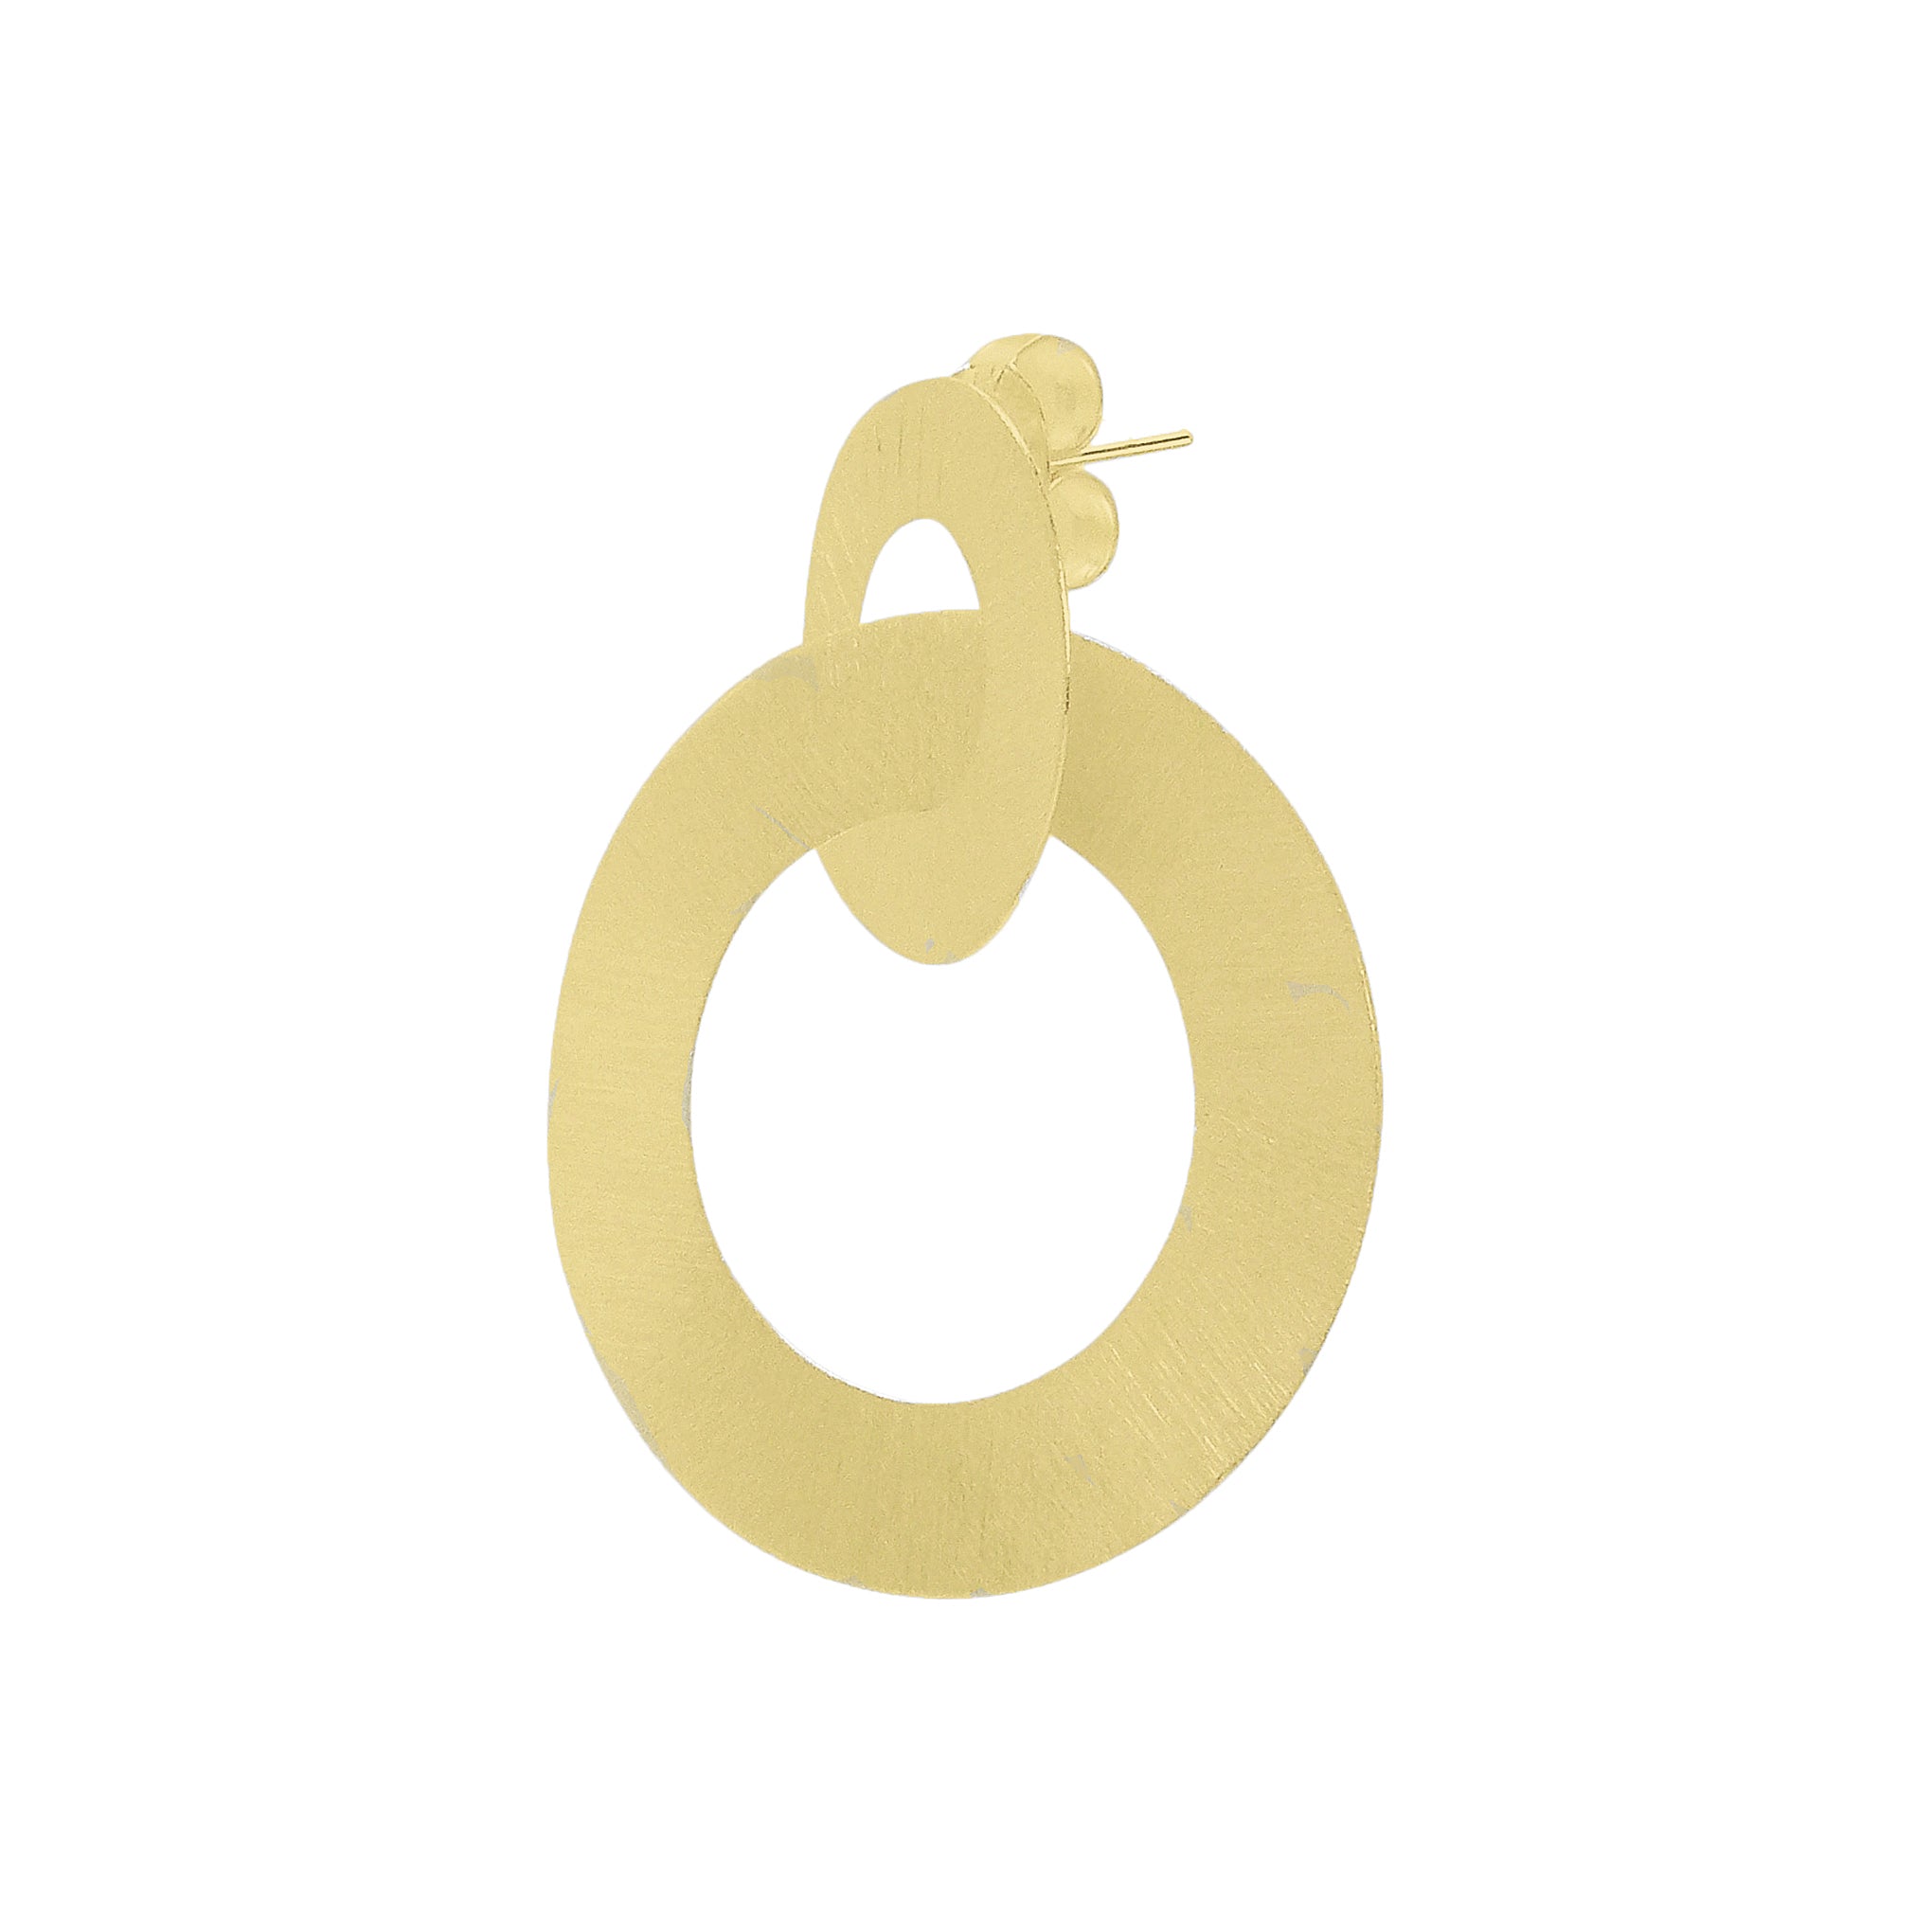 45 Degree Angle View of Sheila Fajl Anna Double Hoop Circle Earring in Brushed 18K Gold Plated